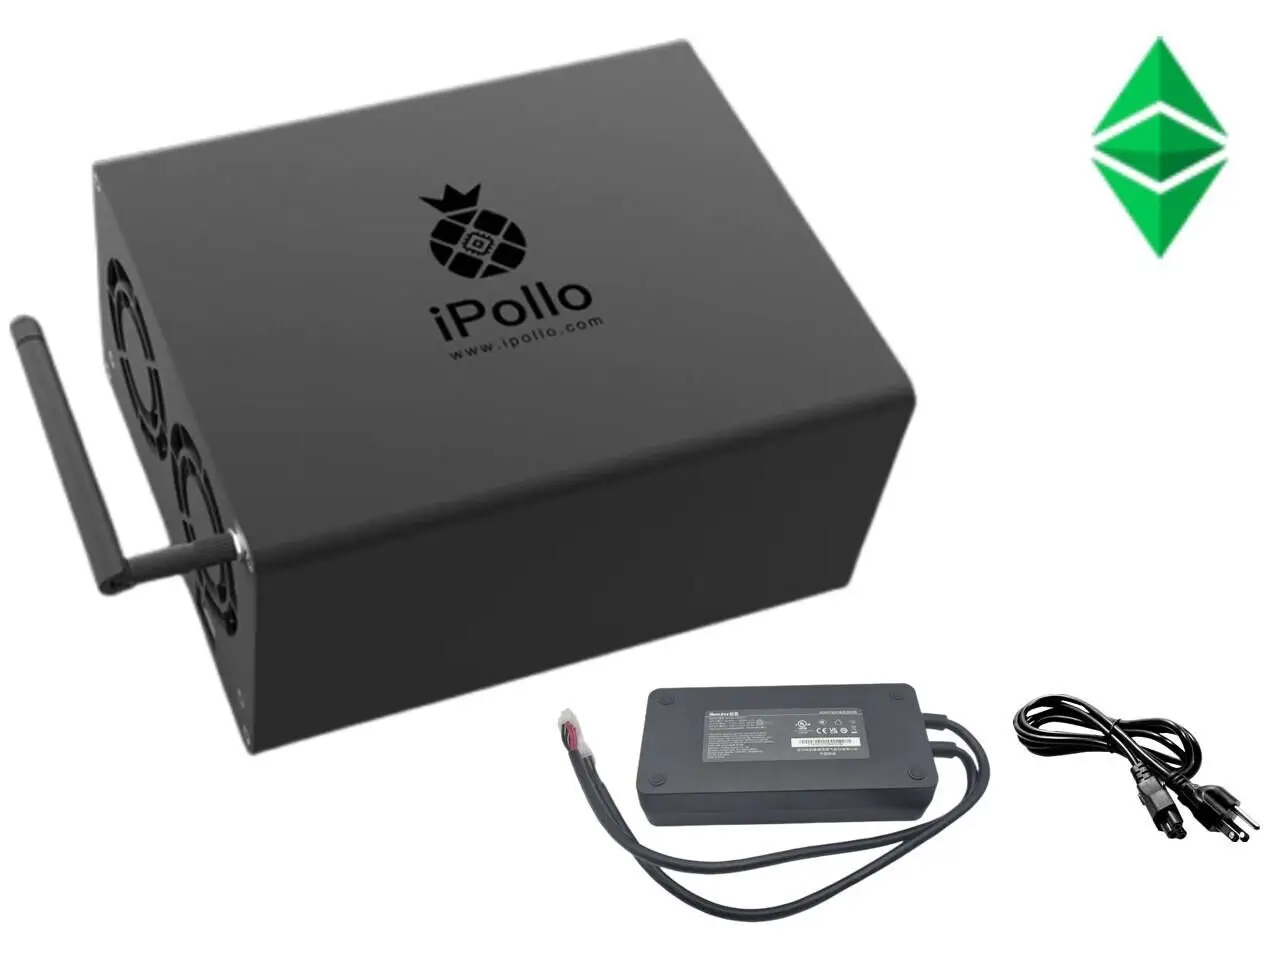 

High Quality iPollo V1 Mini SE Plus Miner 400MH/s 232W 6G Crypto ETC, ETHW, ETHF WiFi Version with PSU Ultra-Silence Home Mining